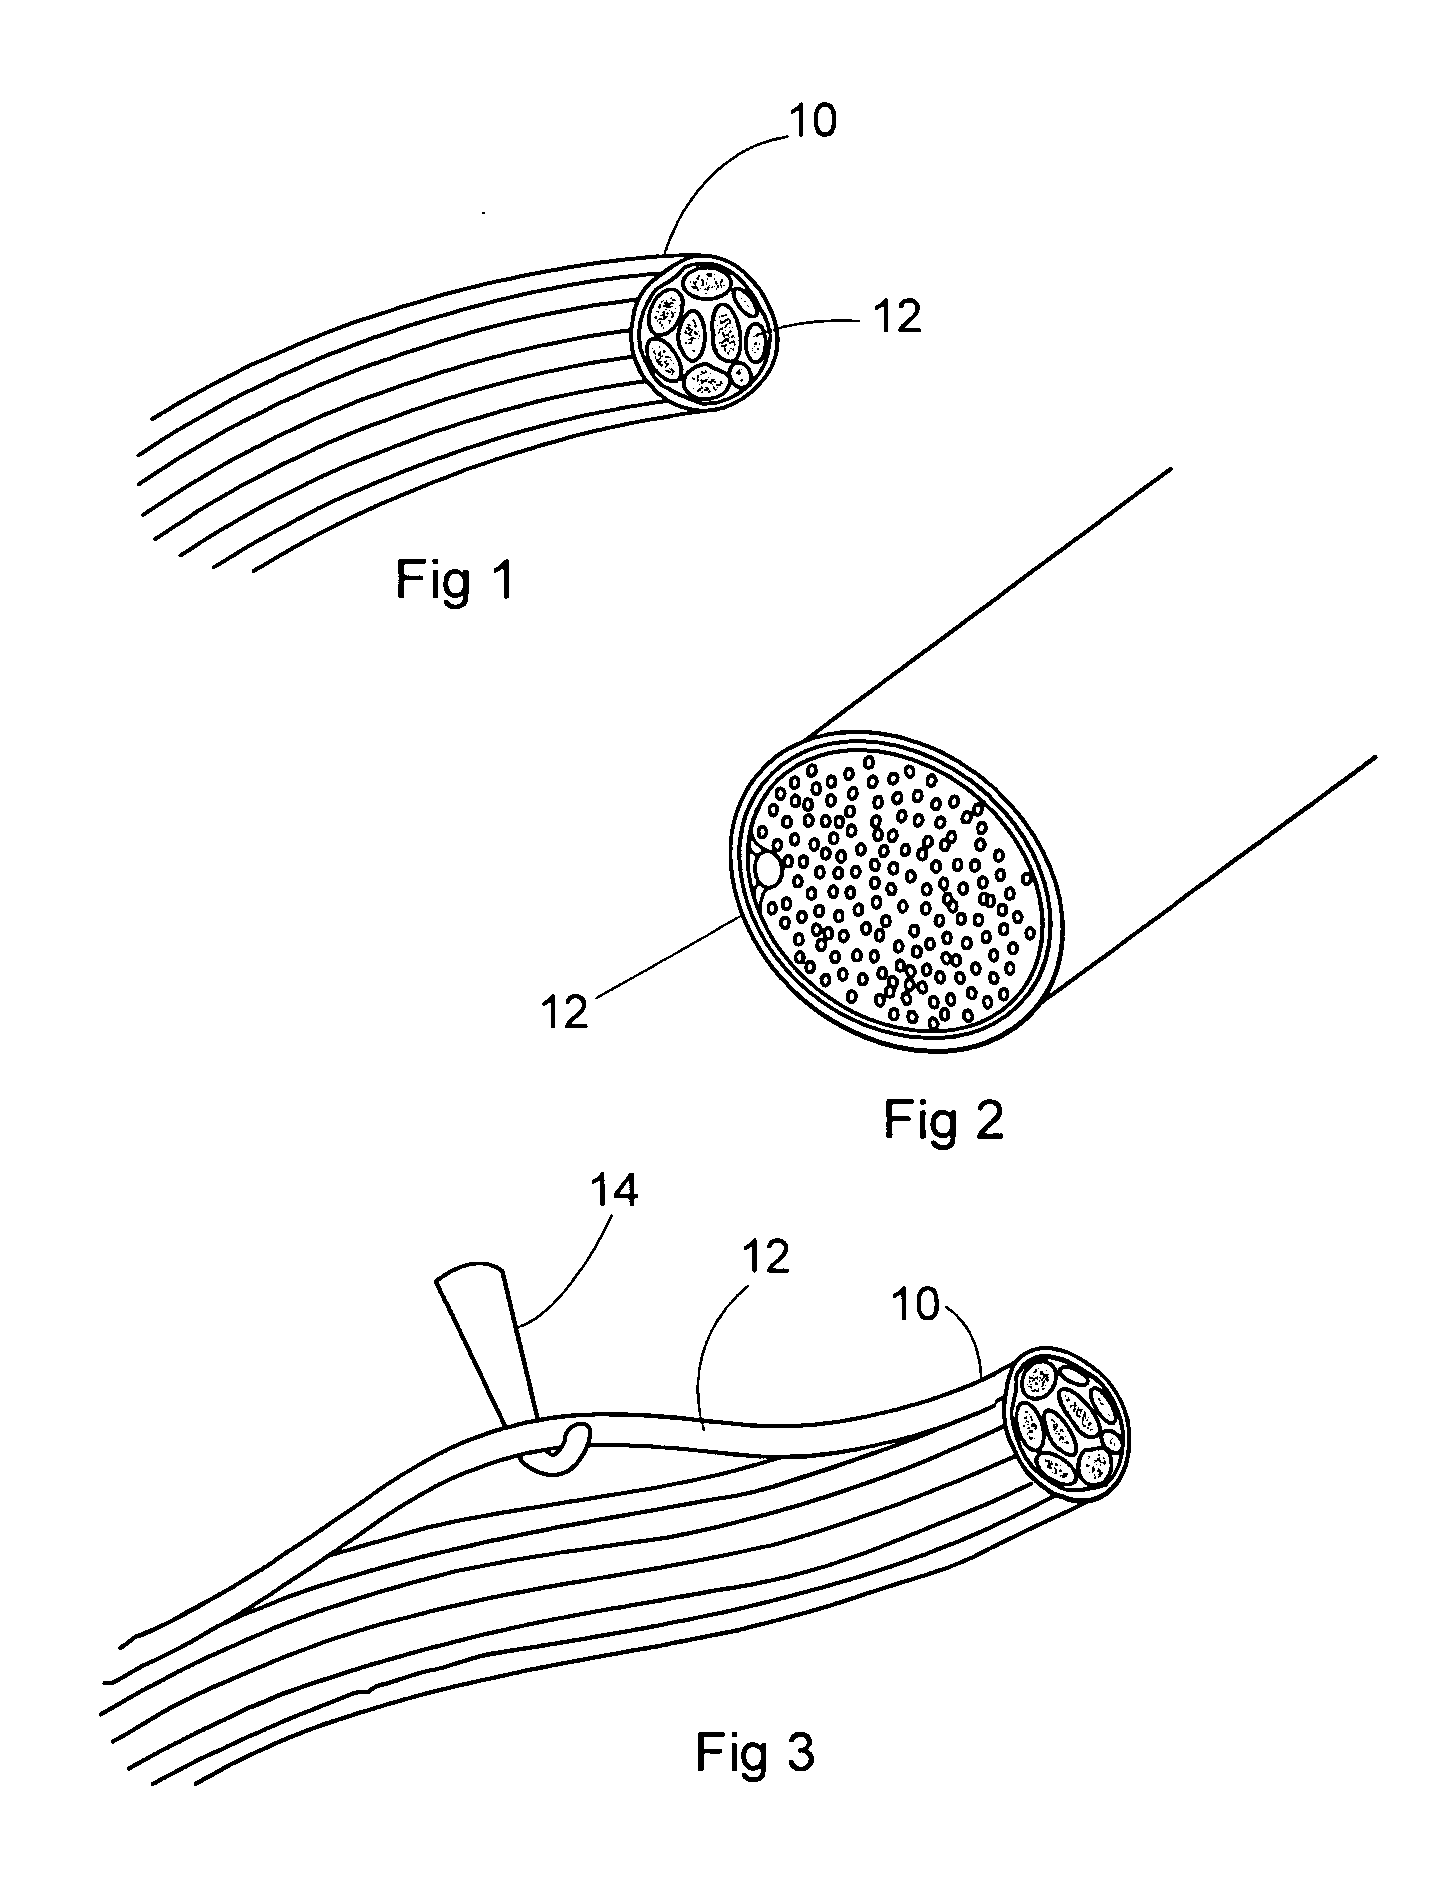 Pelvic implanted neural electrode and method for implanting same